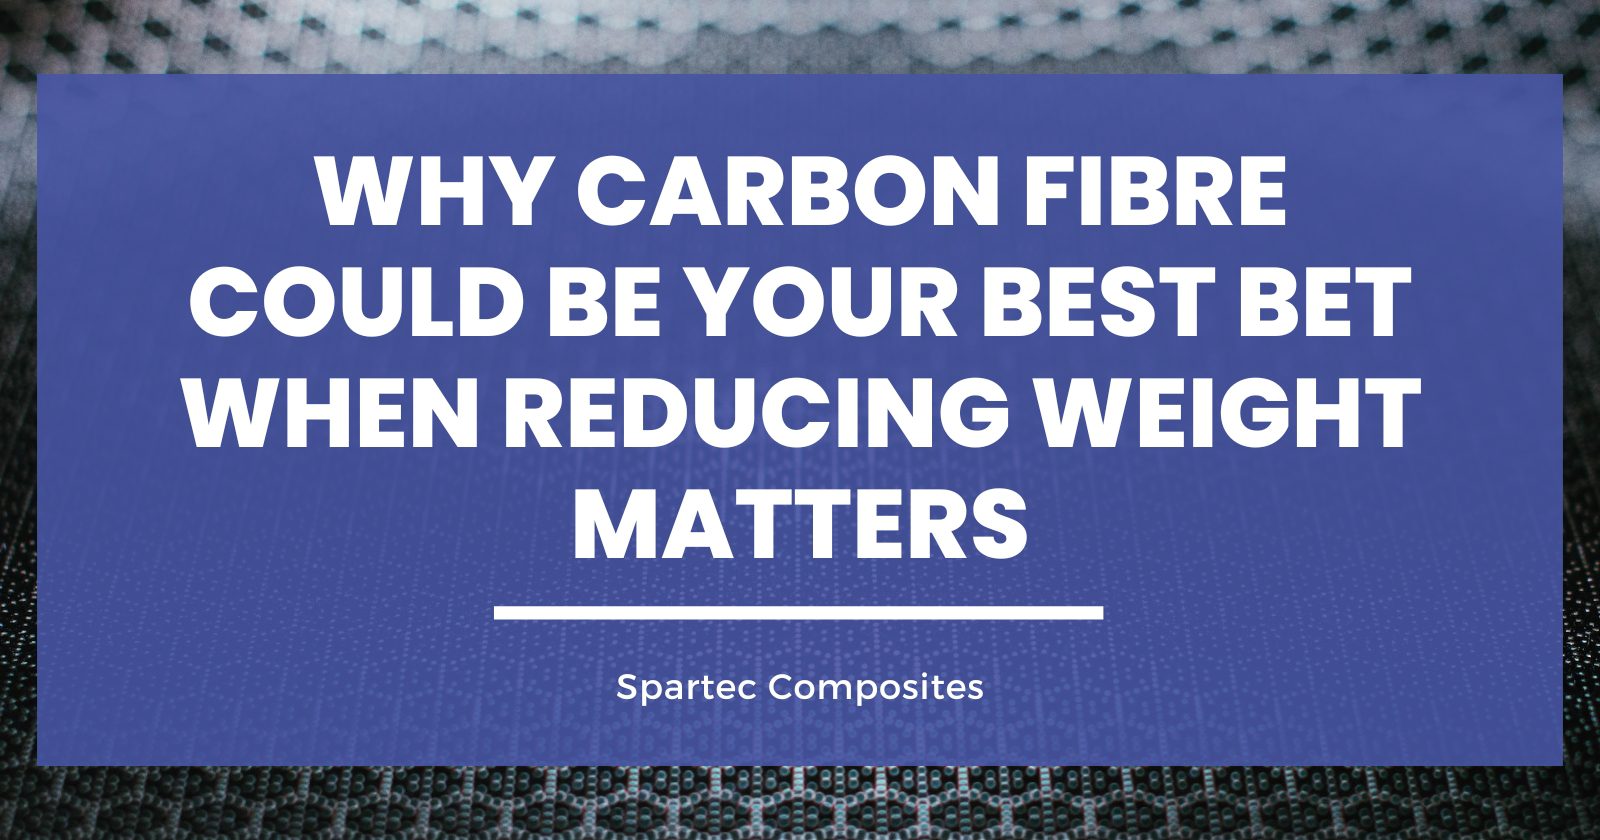 Why Carbon Fibre Could Be Your Best Bet When Reducing Weight Matters